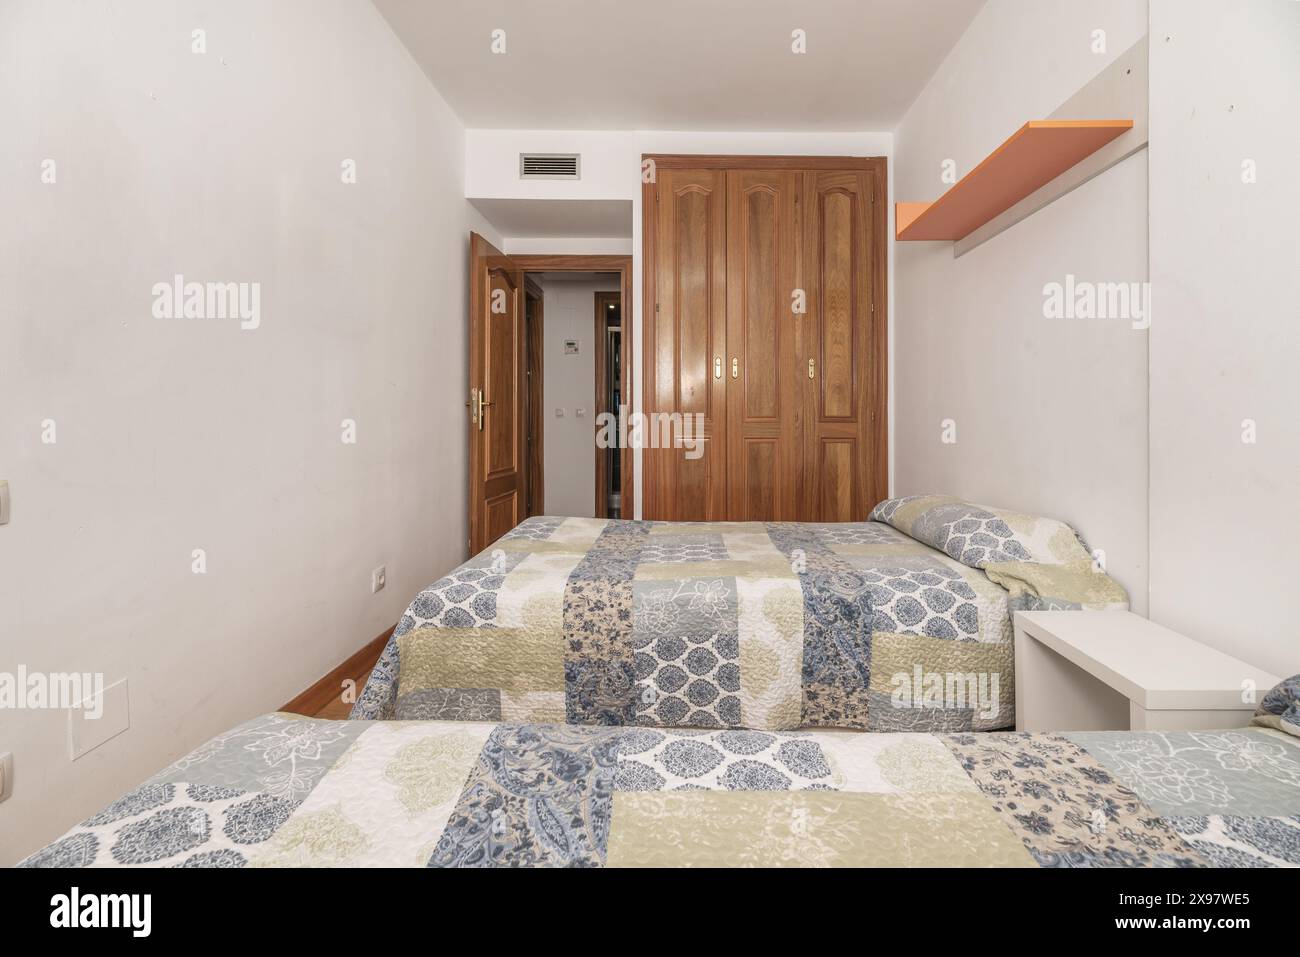 Bedroom with separate twin beds, white painted walls and built-in oak wardrobe Stock Photo